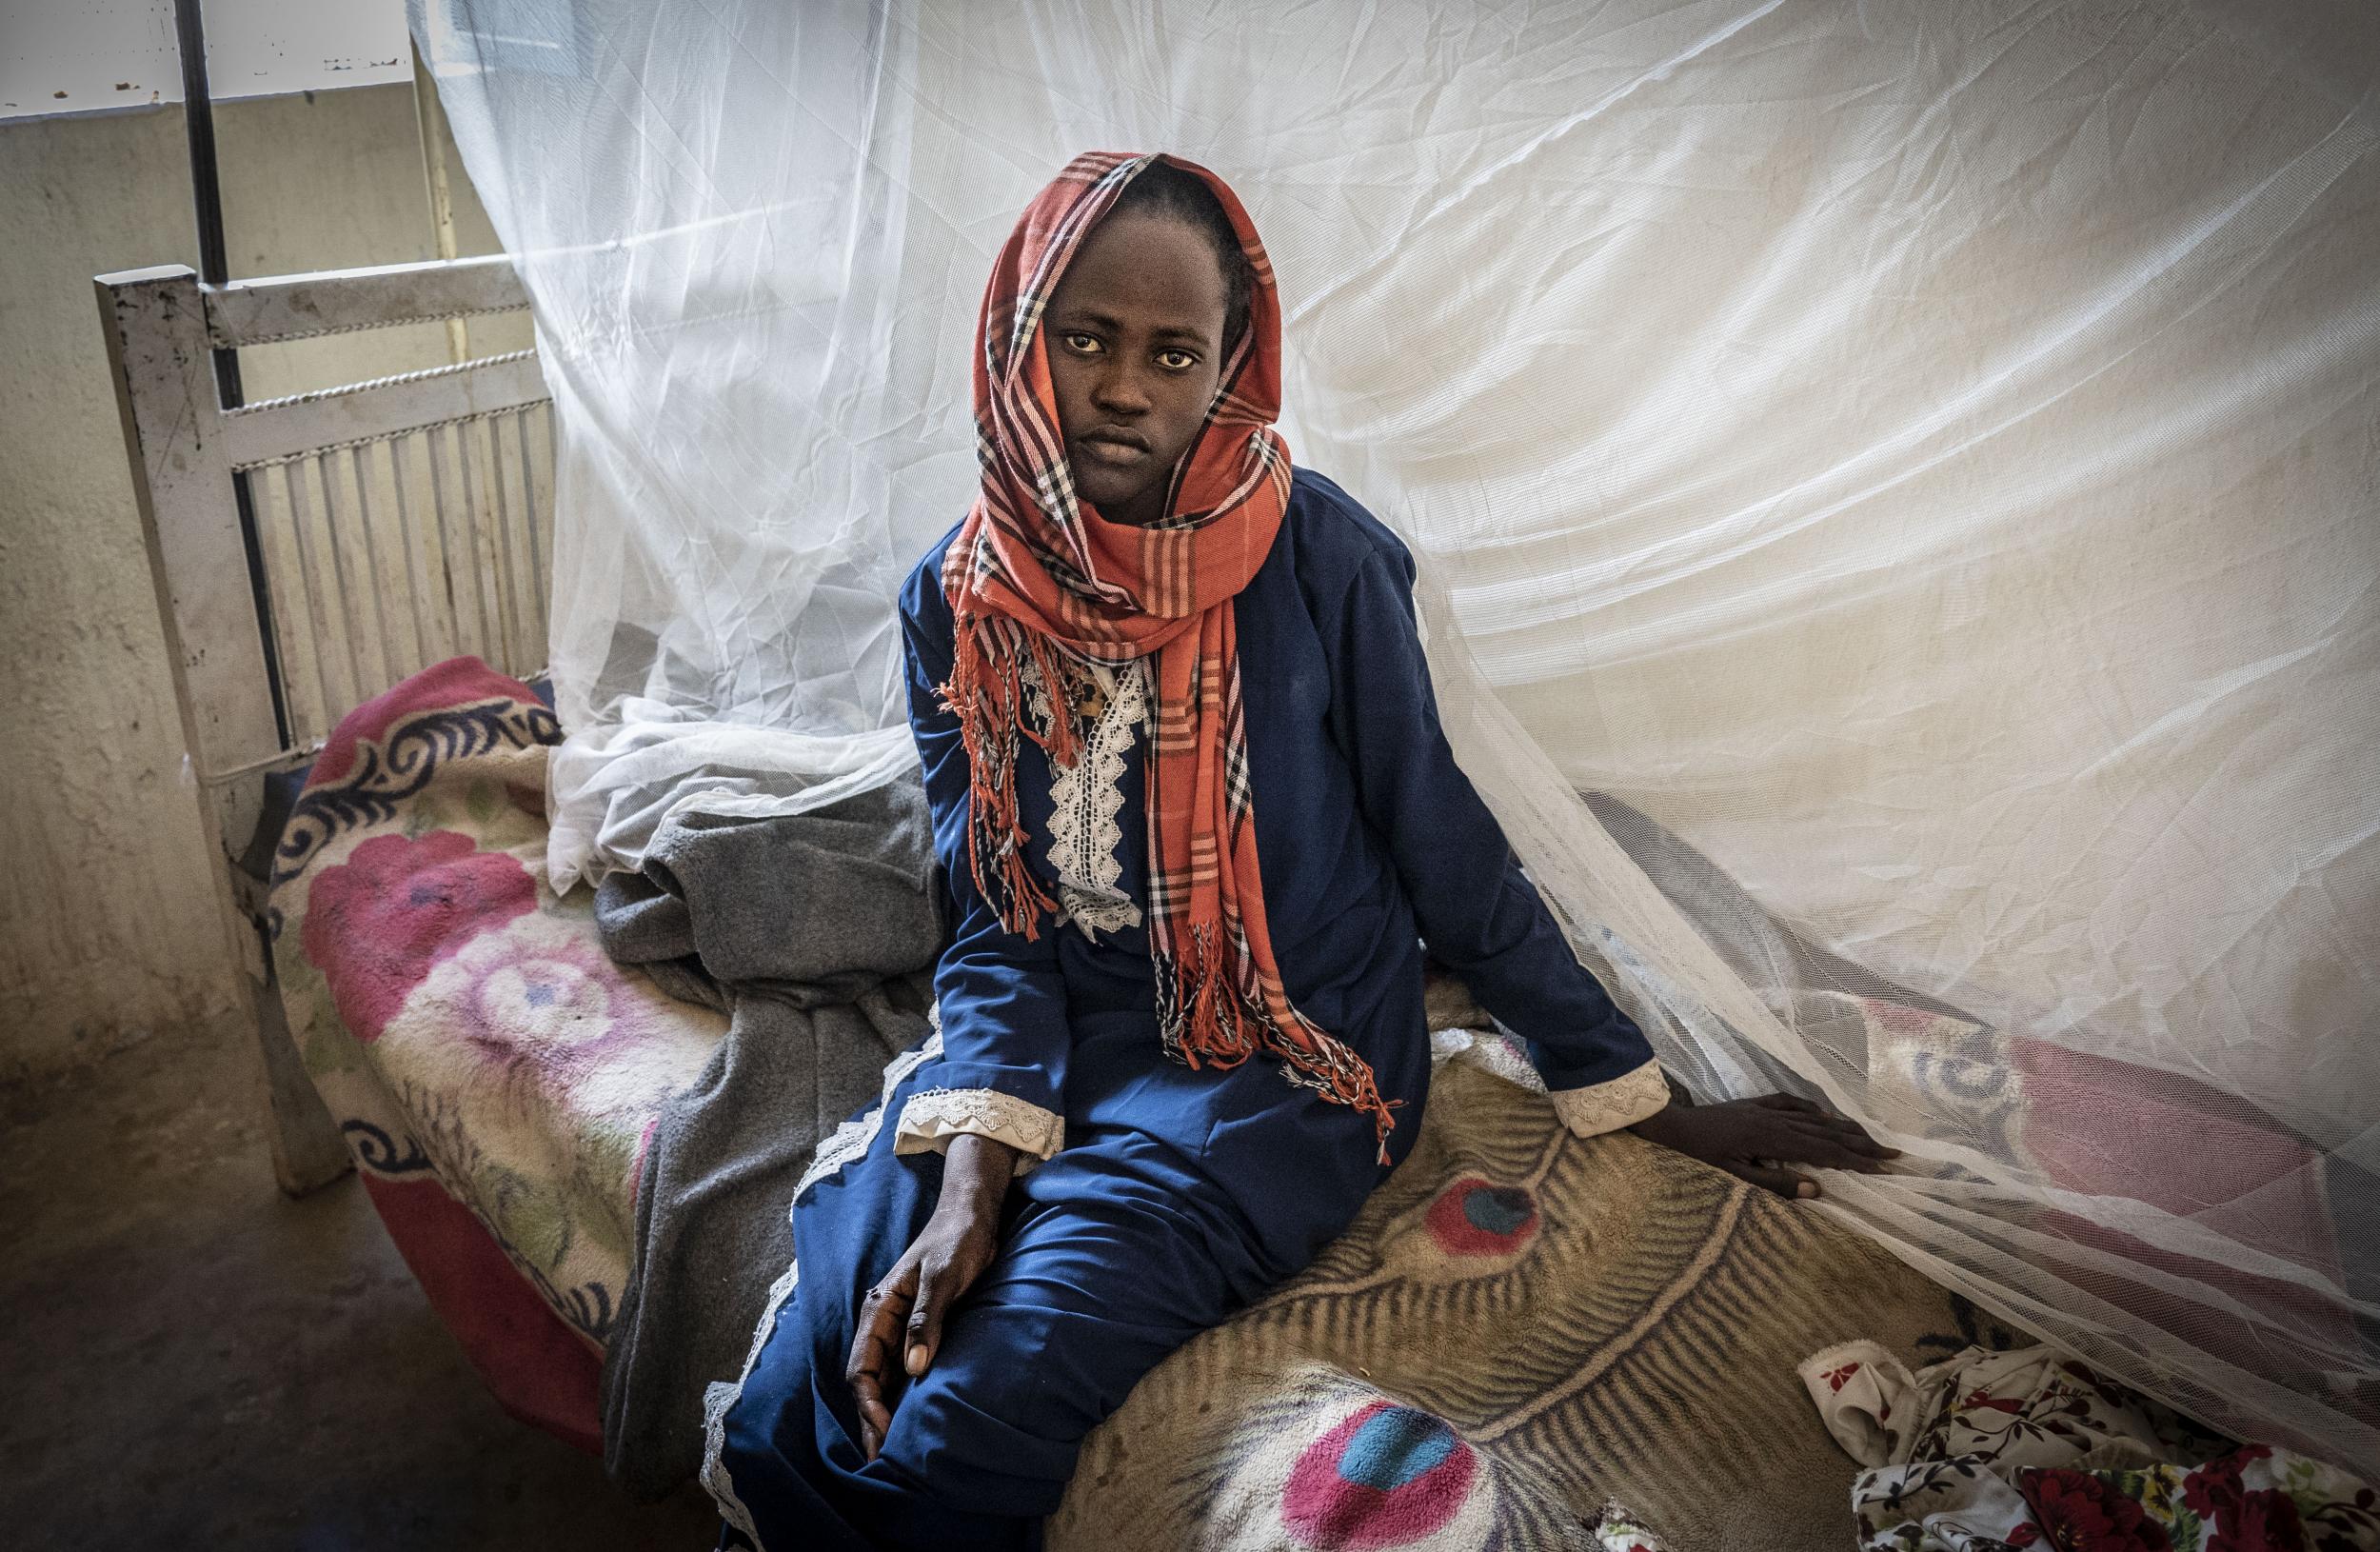 Akram is treated for malaria in Zamzam camp amid an outbreak of the disease in North Darfur